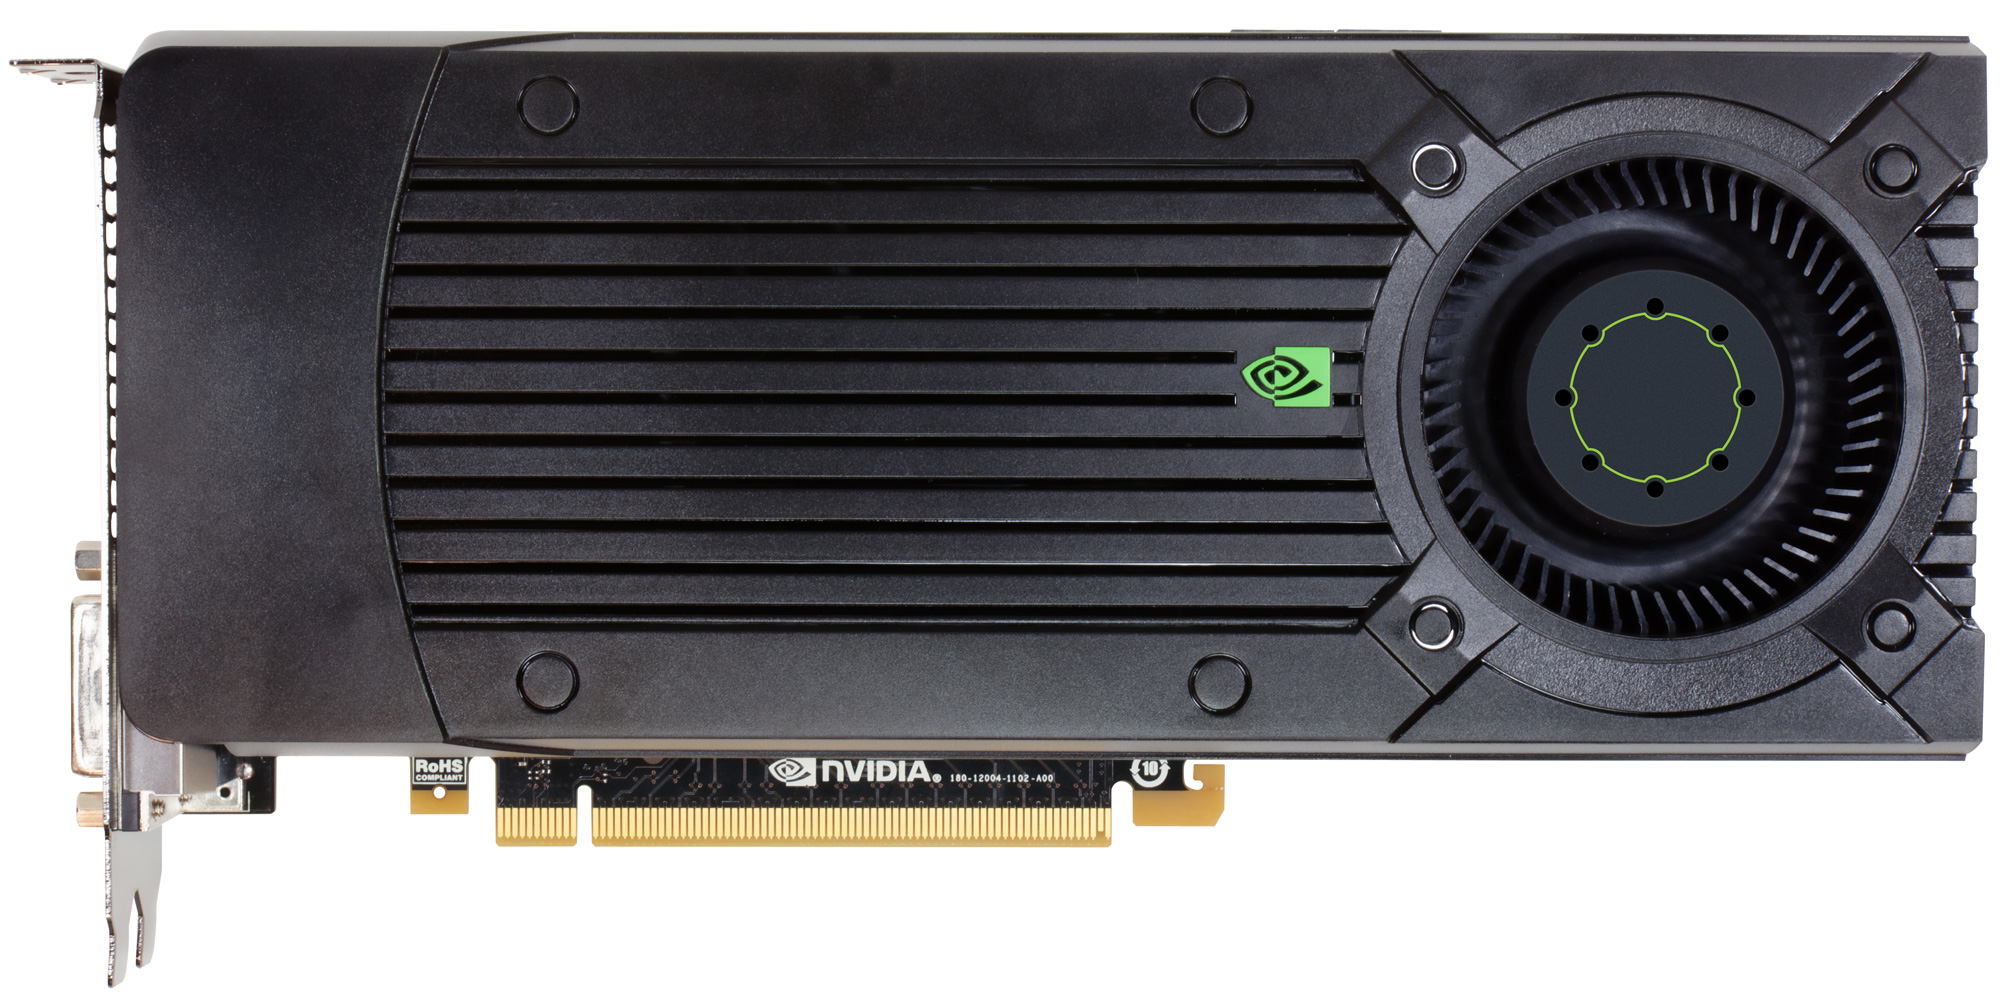 Meet The Geforce Gtx 660 The Nvidia Geforce Gtx 660 Review Gk106 Fills Out The Kepler Family